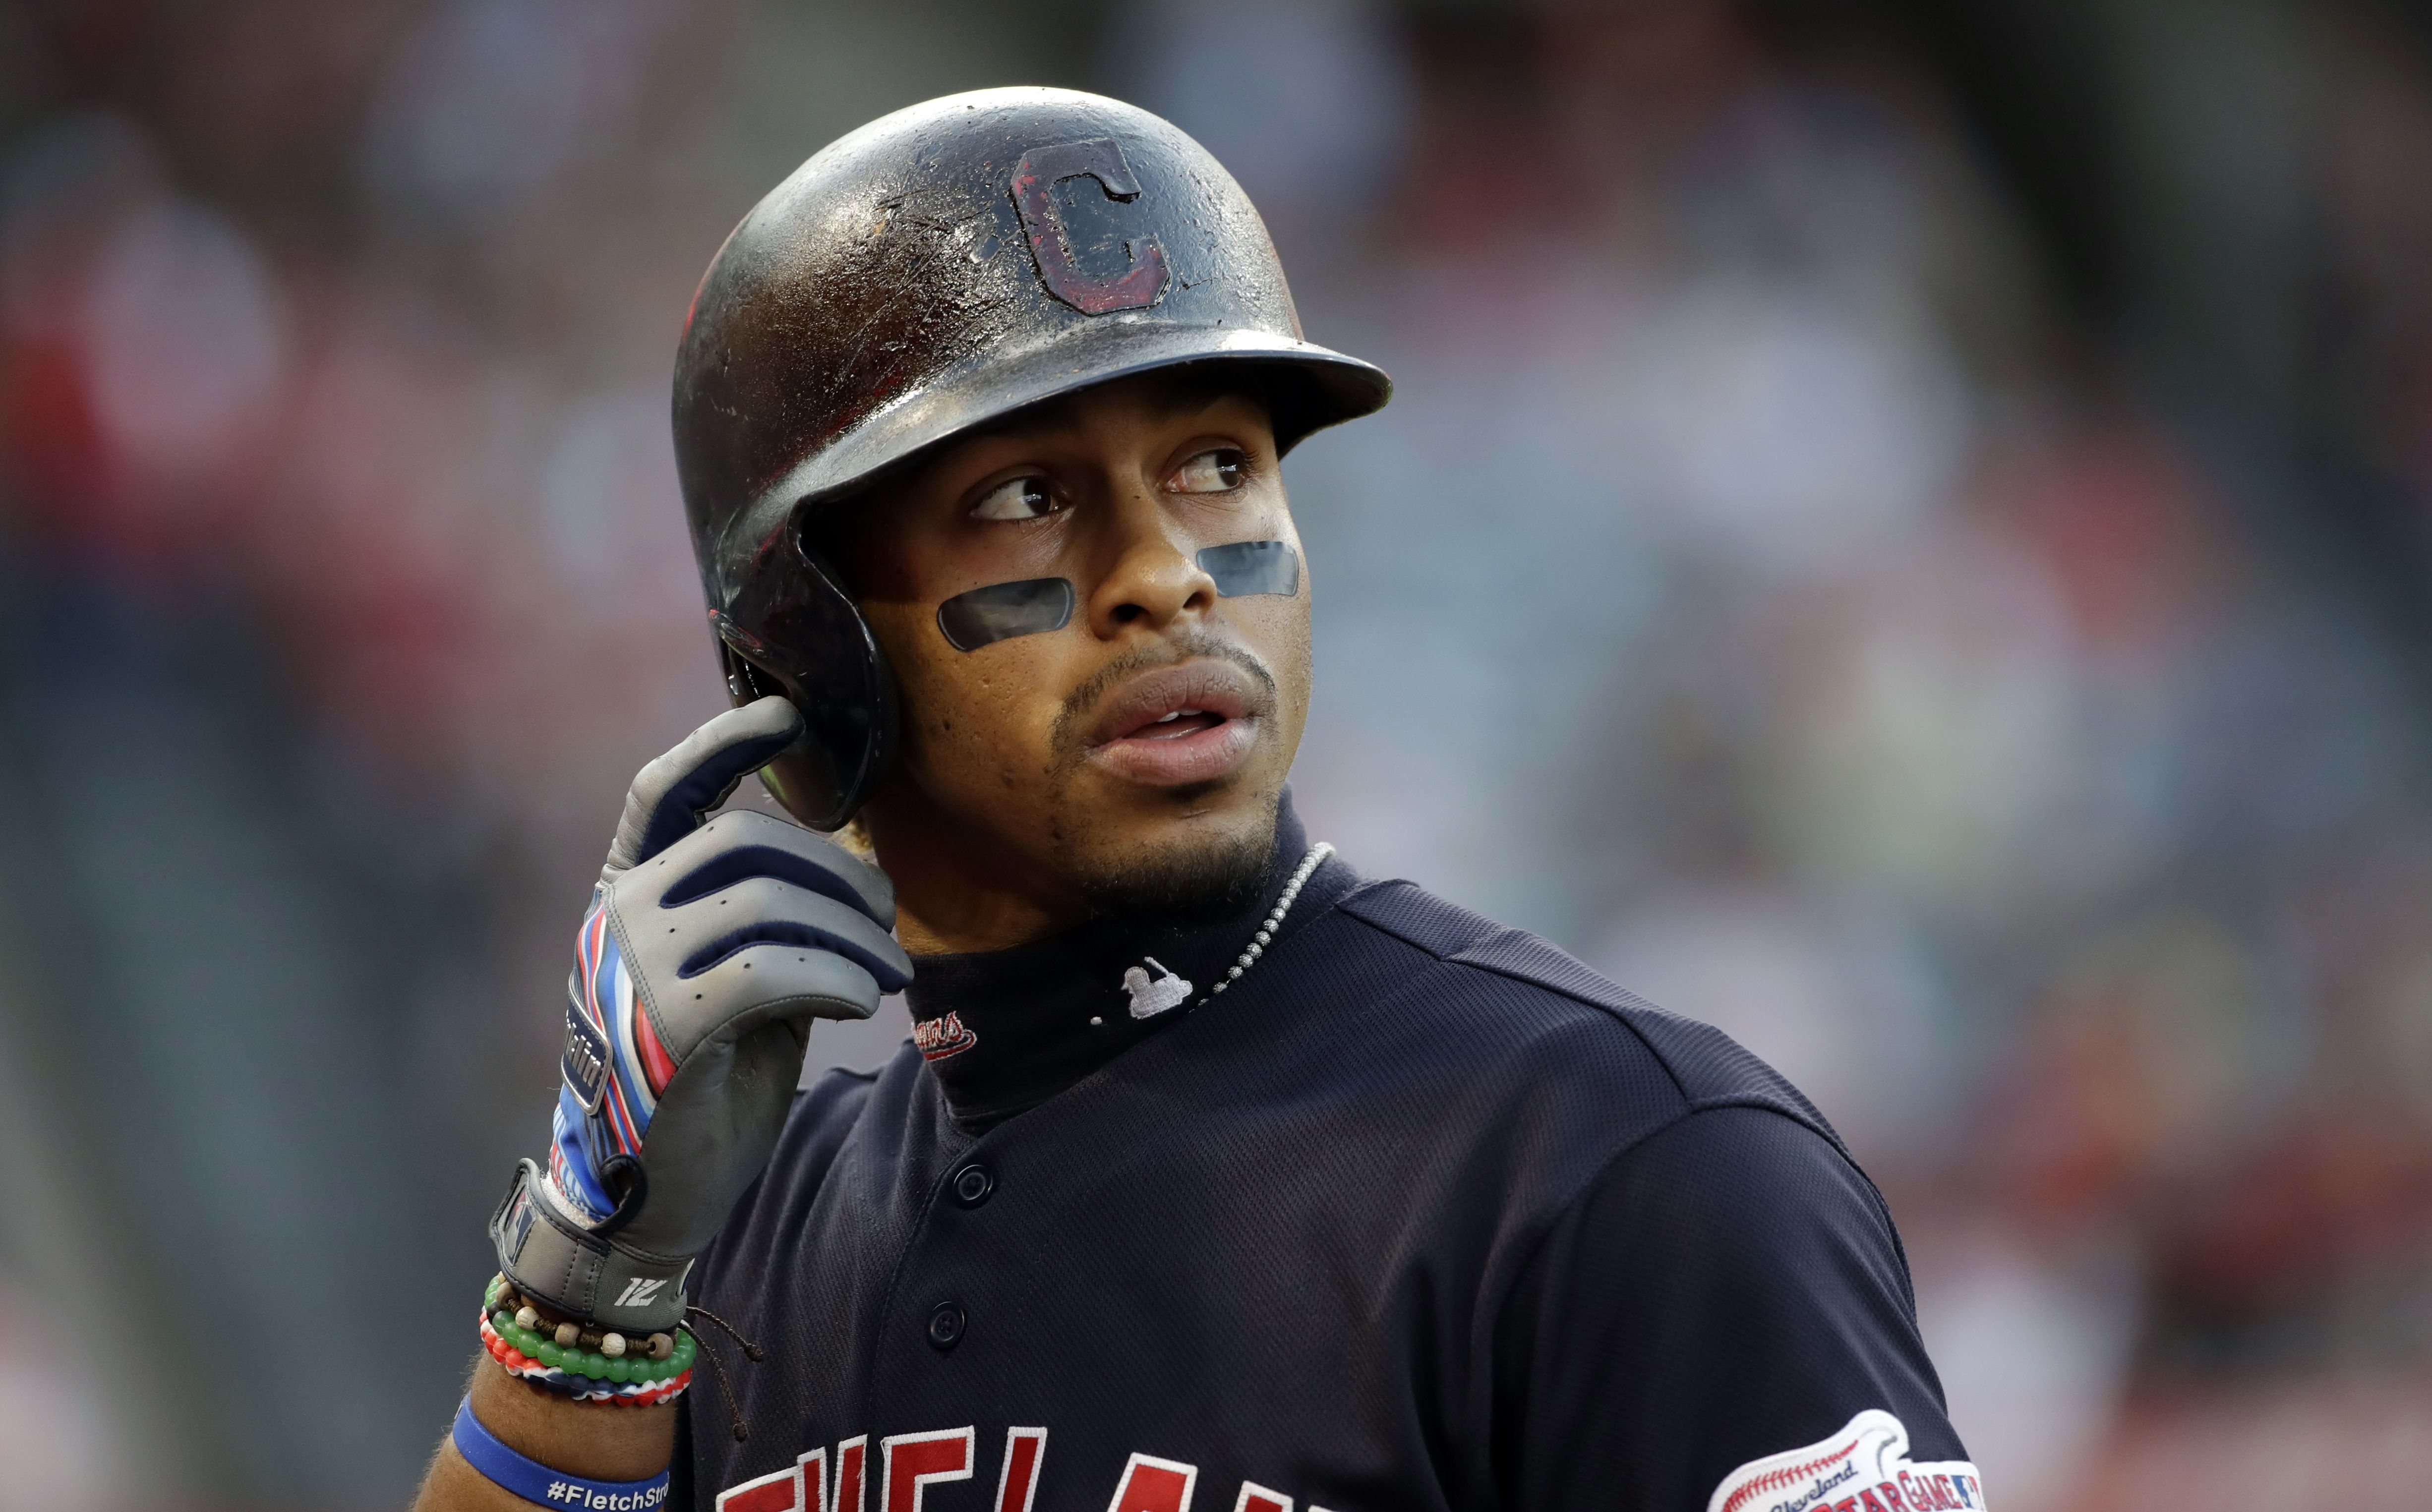 Cut4 on X: Not only does Francisco Lindor play a mean shortstop